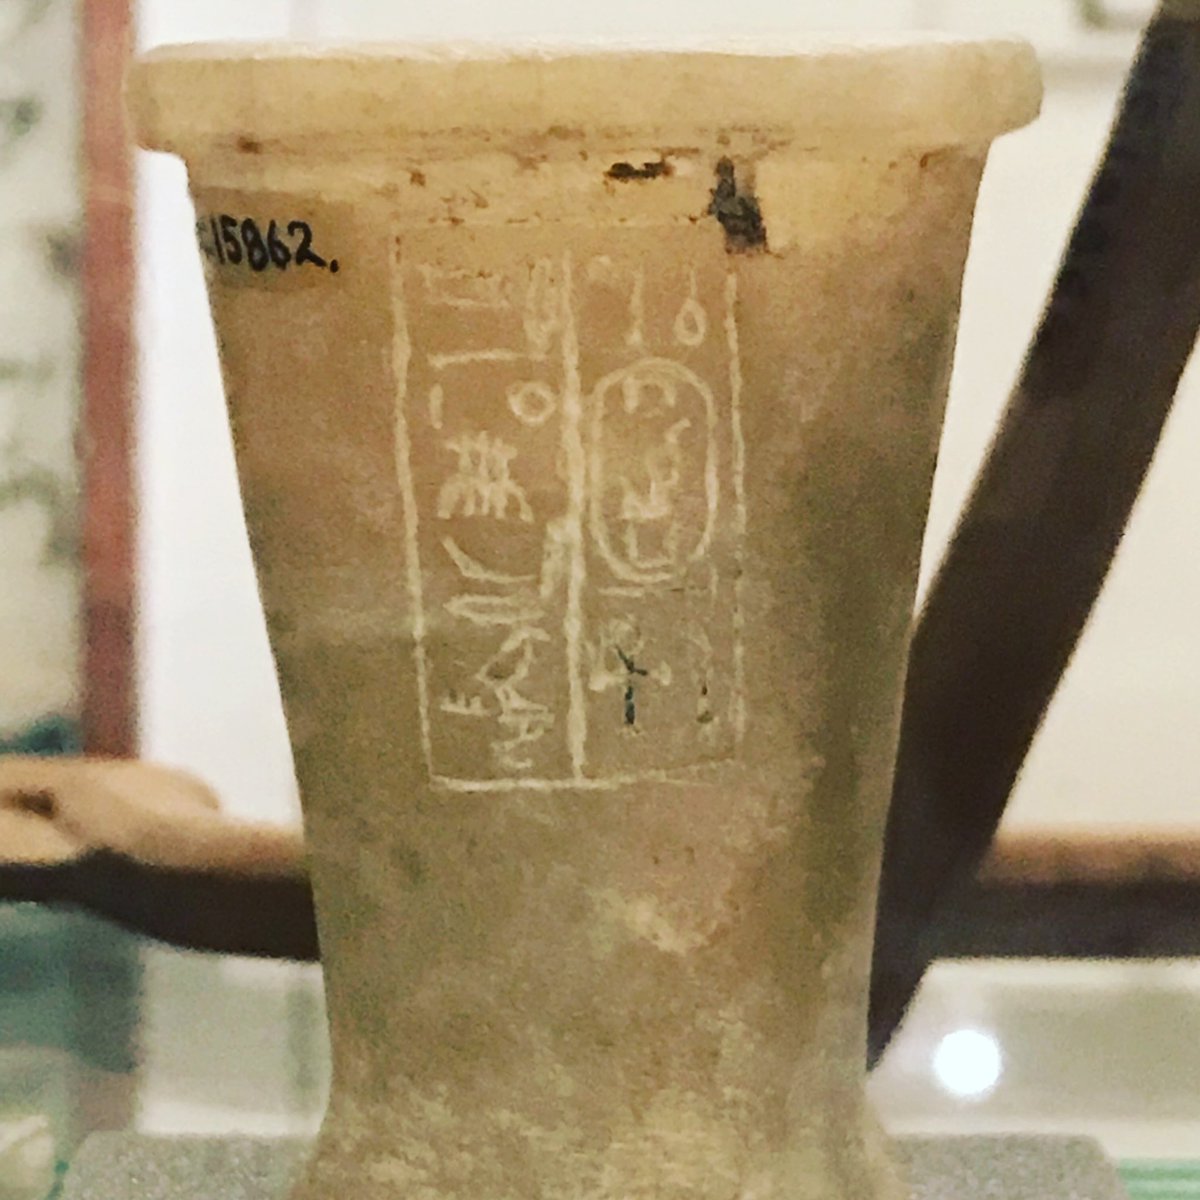 (4) These next images all concern Hatshepsut, Pharaoh of the 18th Dynasty. A female ruler who was successful in battle, expansion of the empire, and trade. This wee jar (which I was privileged to examine at close quarters) contains cedar resin c. 3.5KYA, recovered from...